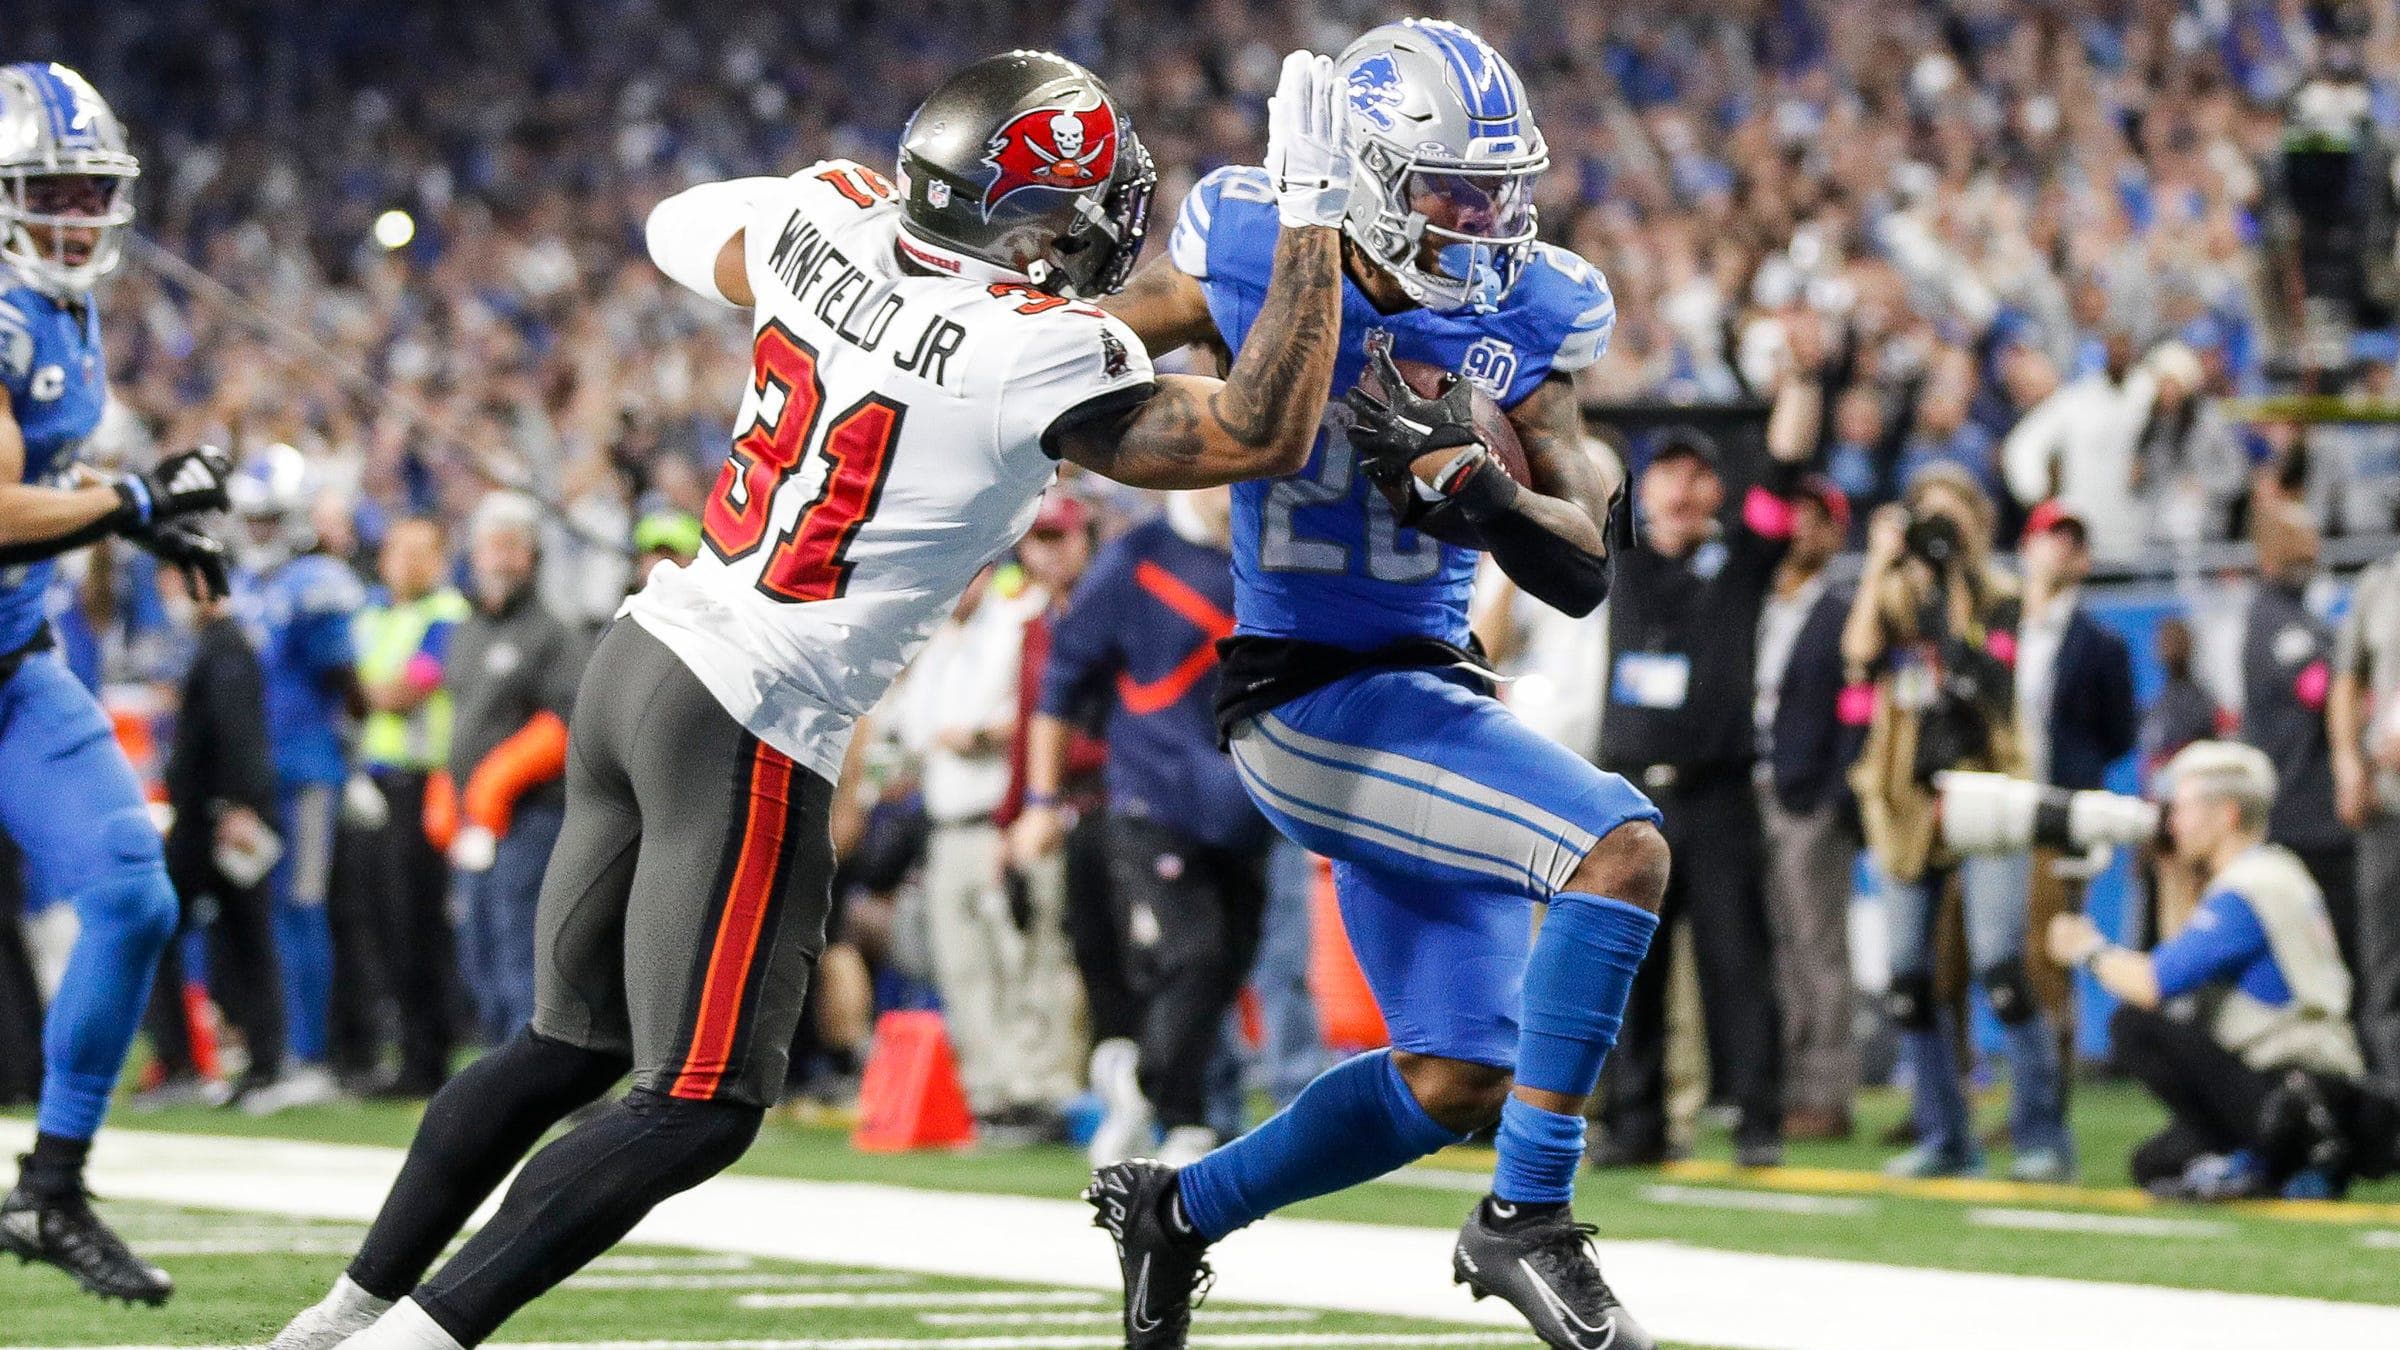 Detroit Lions running back Jahmyr Gibbs (26) runs for a touchdown against the Tampa Bay Buccaneers.